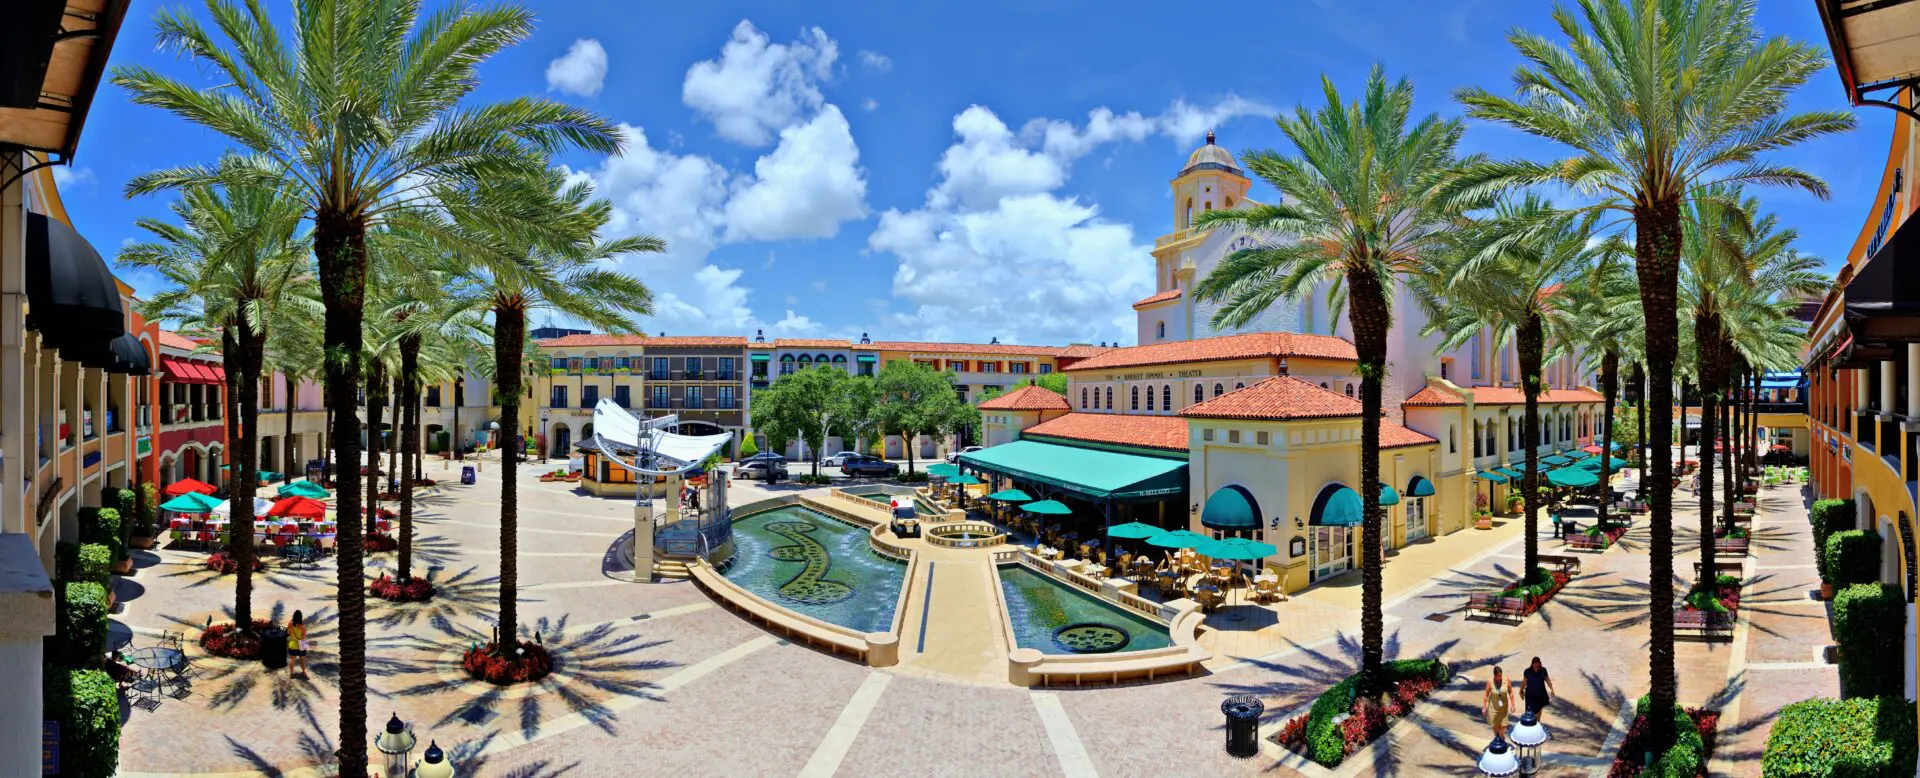 West Palm Beach, Florida, USA - June 26, 2013: Pedestrians walk through City Place. The mixed-use development is an upscale downtown lifestyle center opened in 2000.